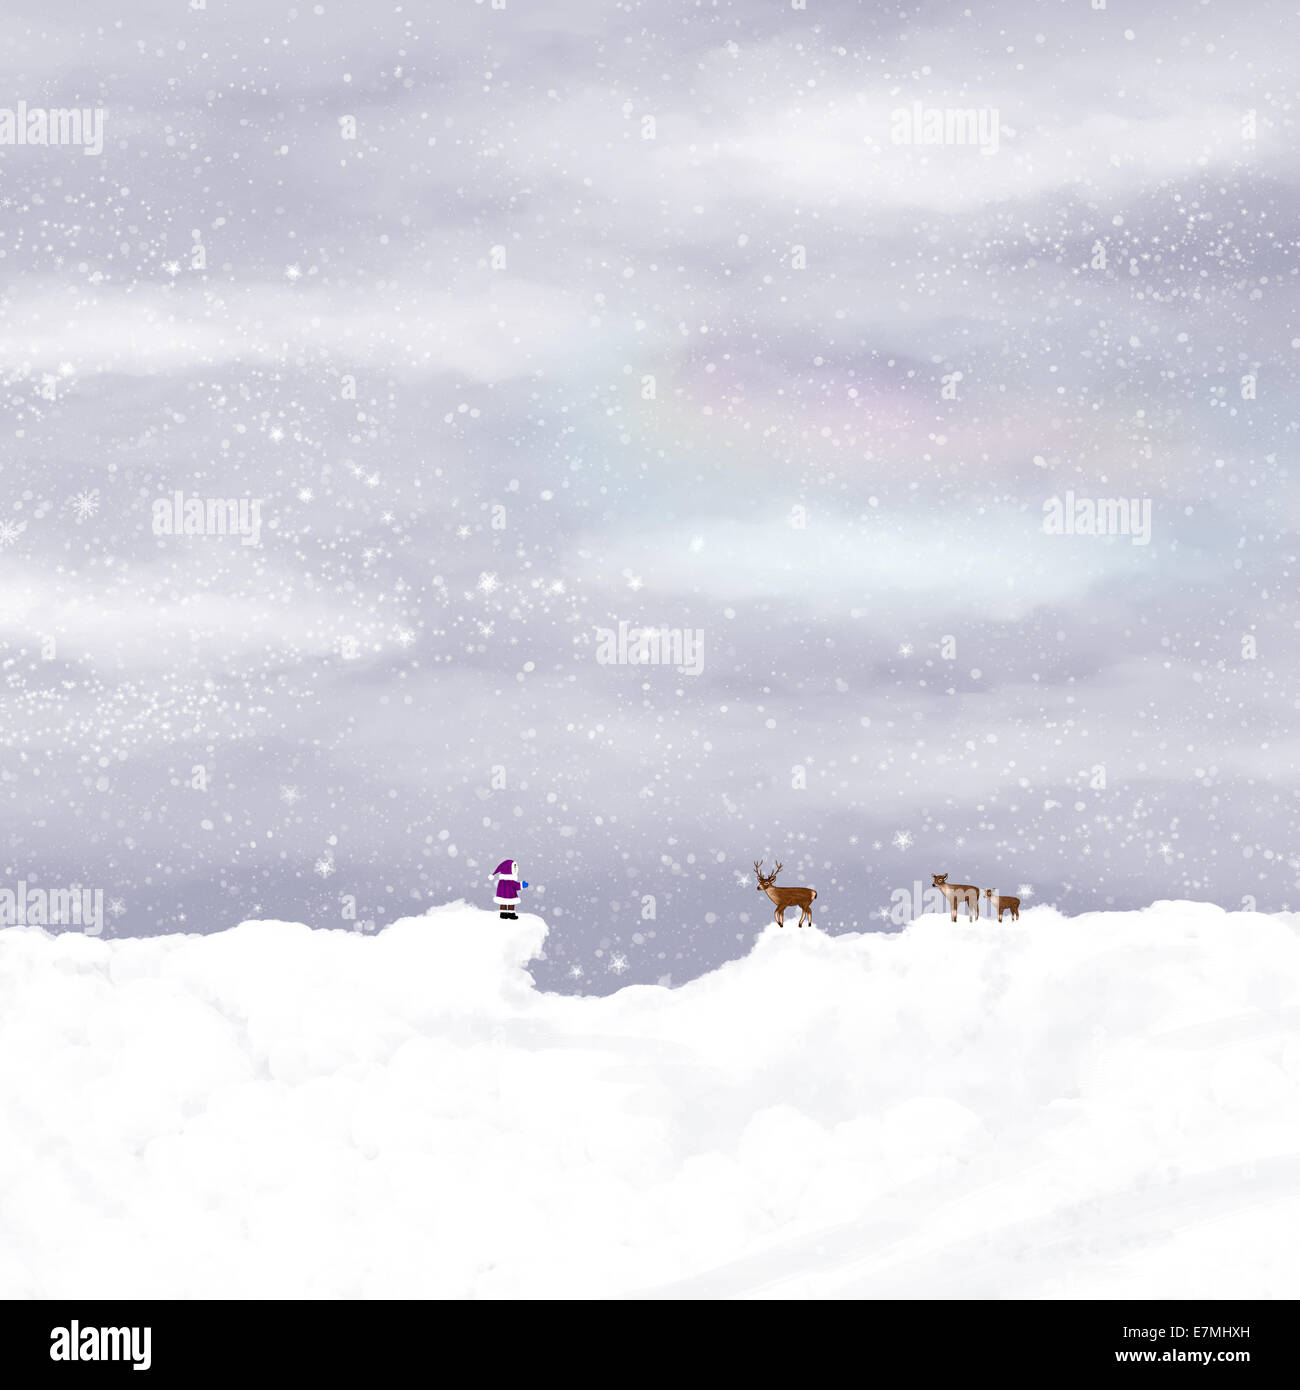 Winter illustration. Little child and deers in a snow. Stock Photo